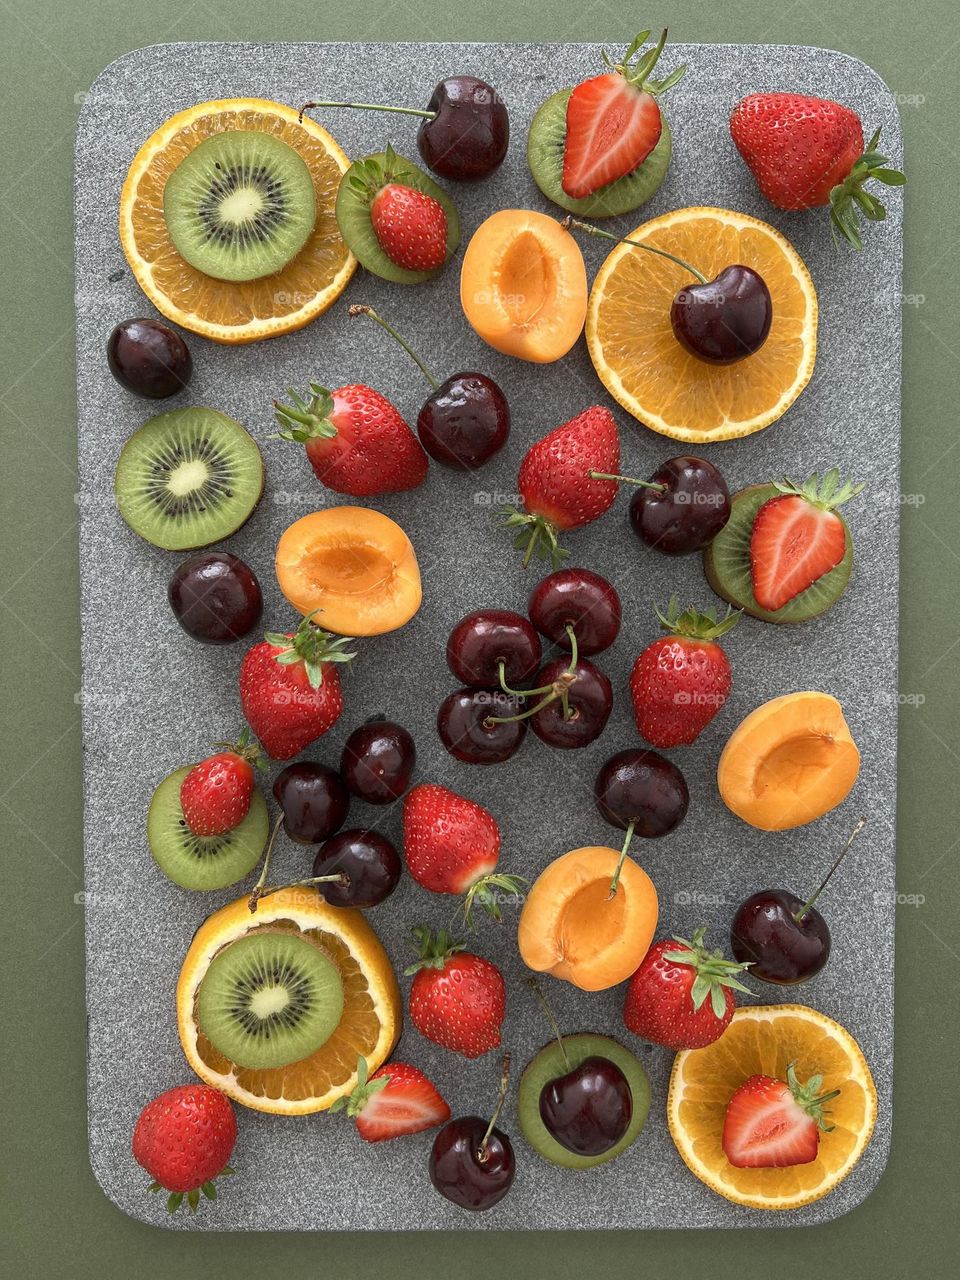 Refreshing snacks. Delicious summer berries and fruits. Summer treats, summer time. Juicy cherry ,sweet strawberry, yummy apricot, tasty orange and kiwi.